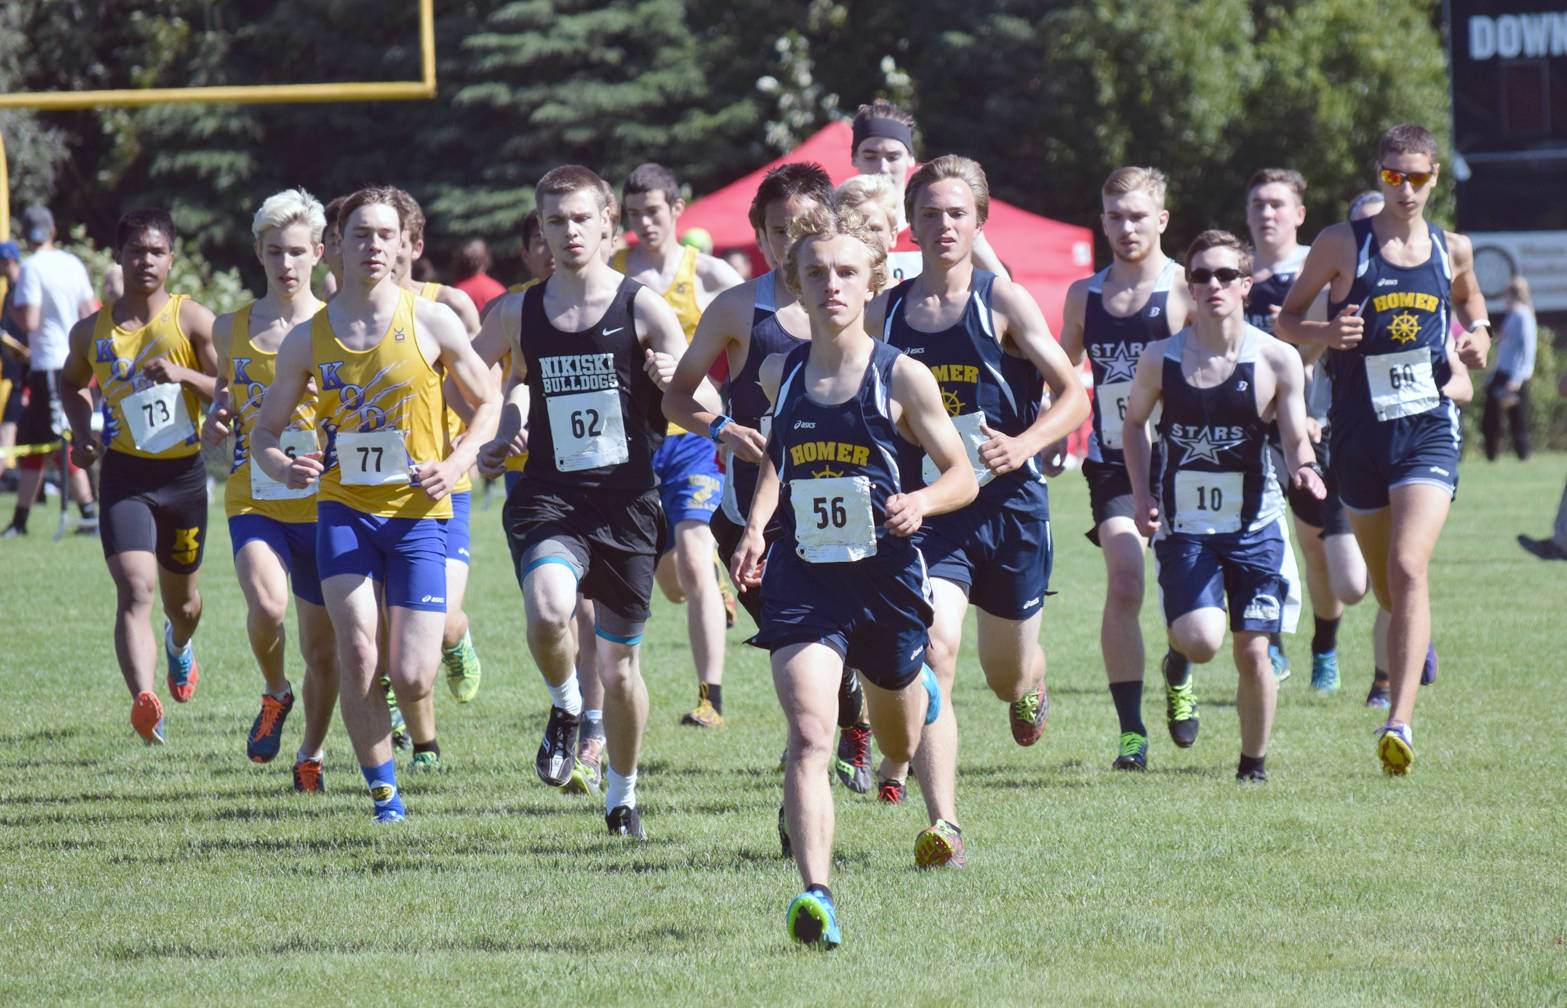 Homer’s Jacob Davis leads the field at the start of the junior-senior boys race Monday, Aug. 14, 2017 at the Nikiski Class Races at Nikiski High School. Davis would finish second in the race. (Photo by Jeff Helminiak/Peninsula Clarion)